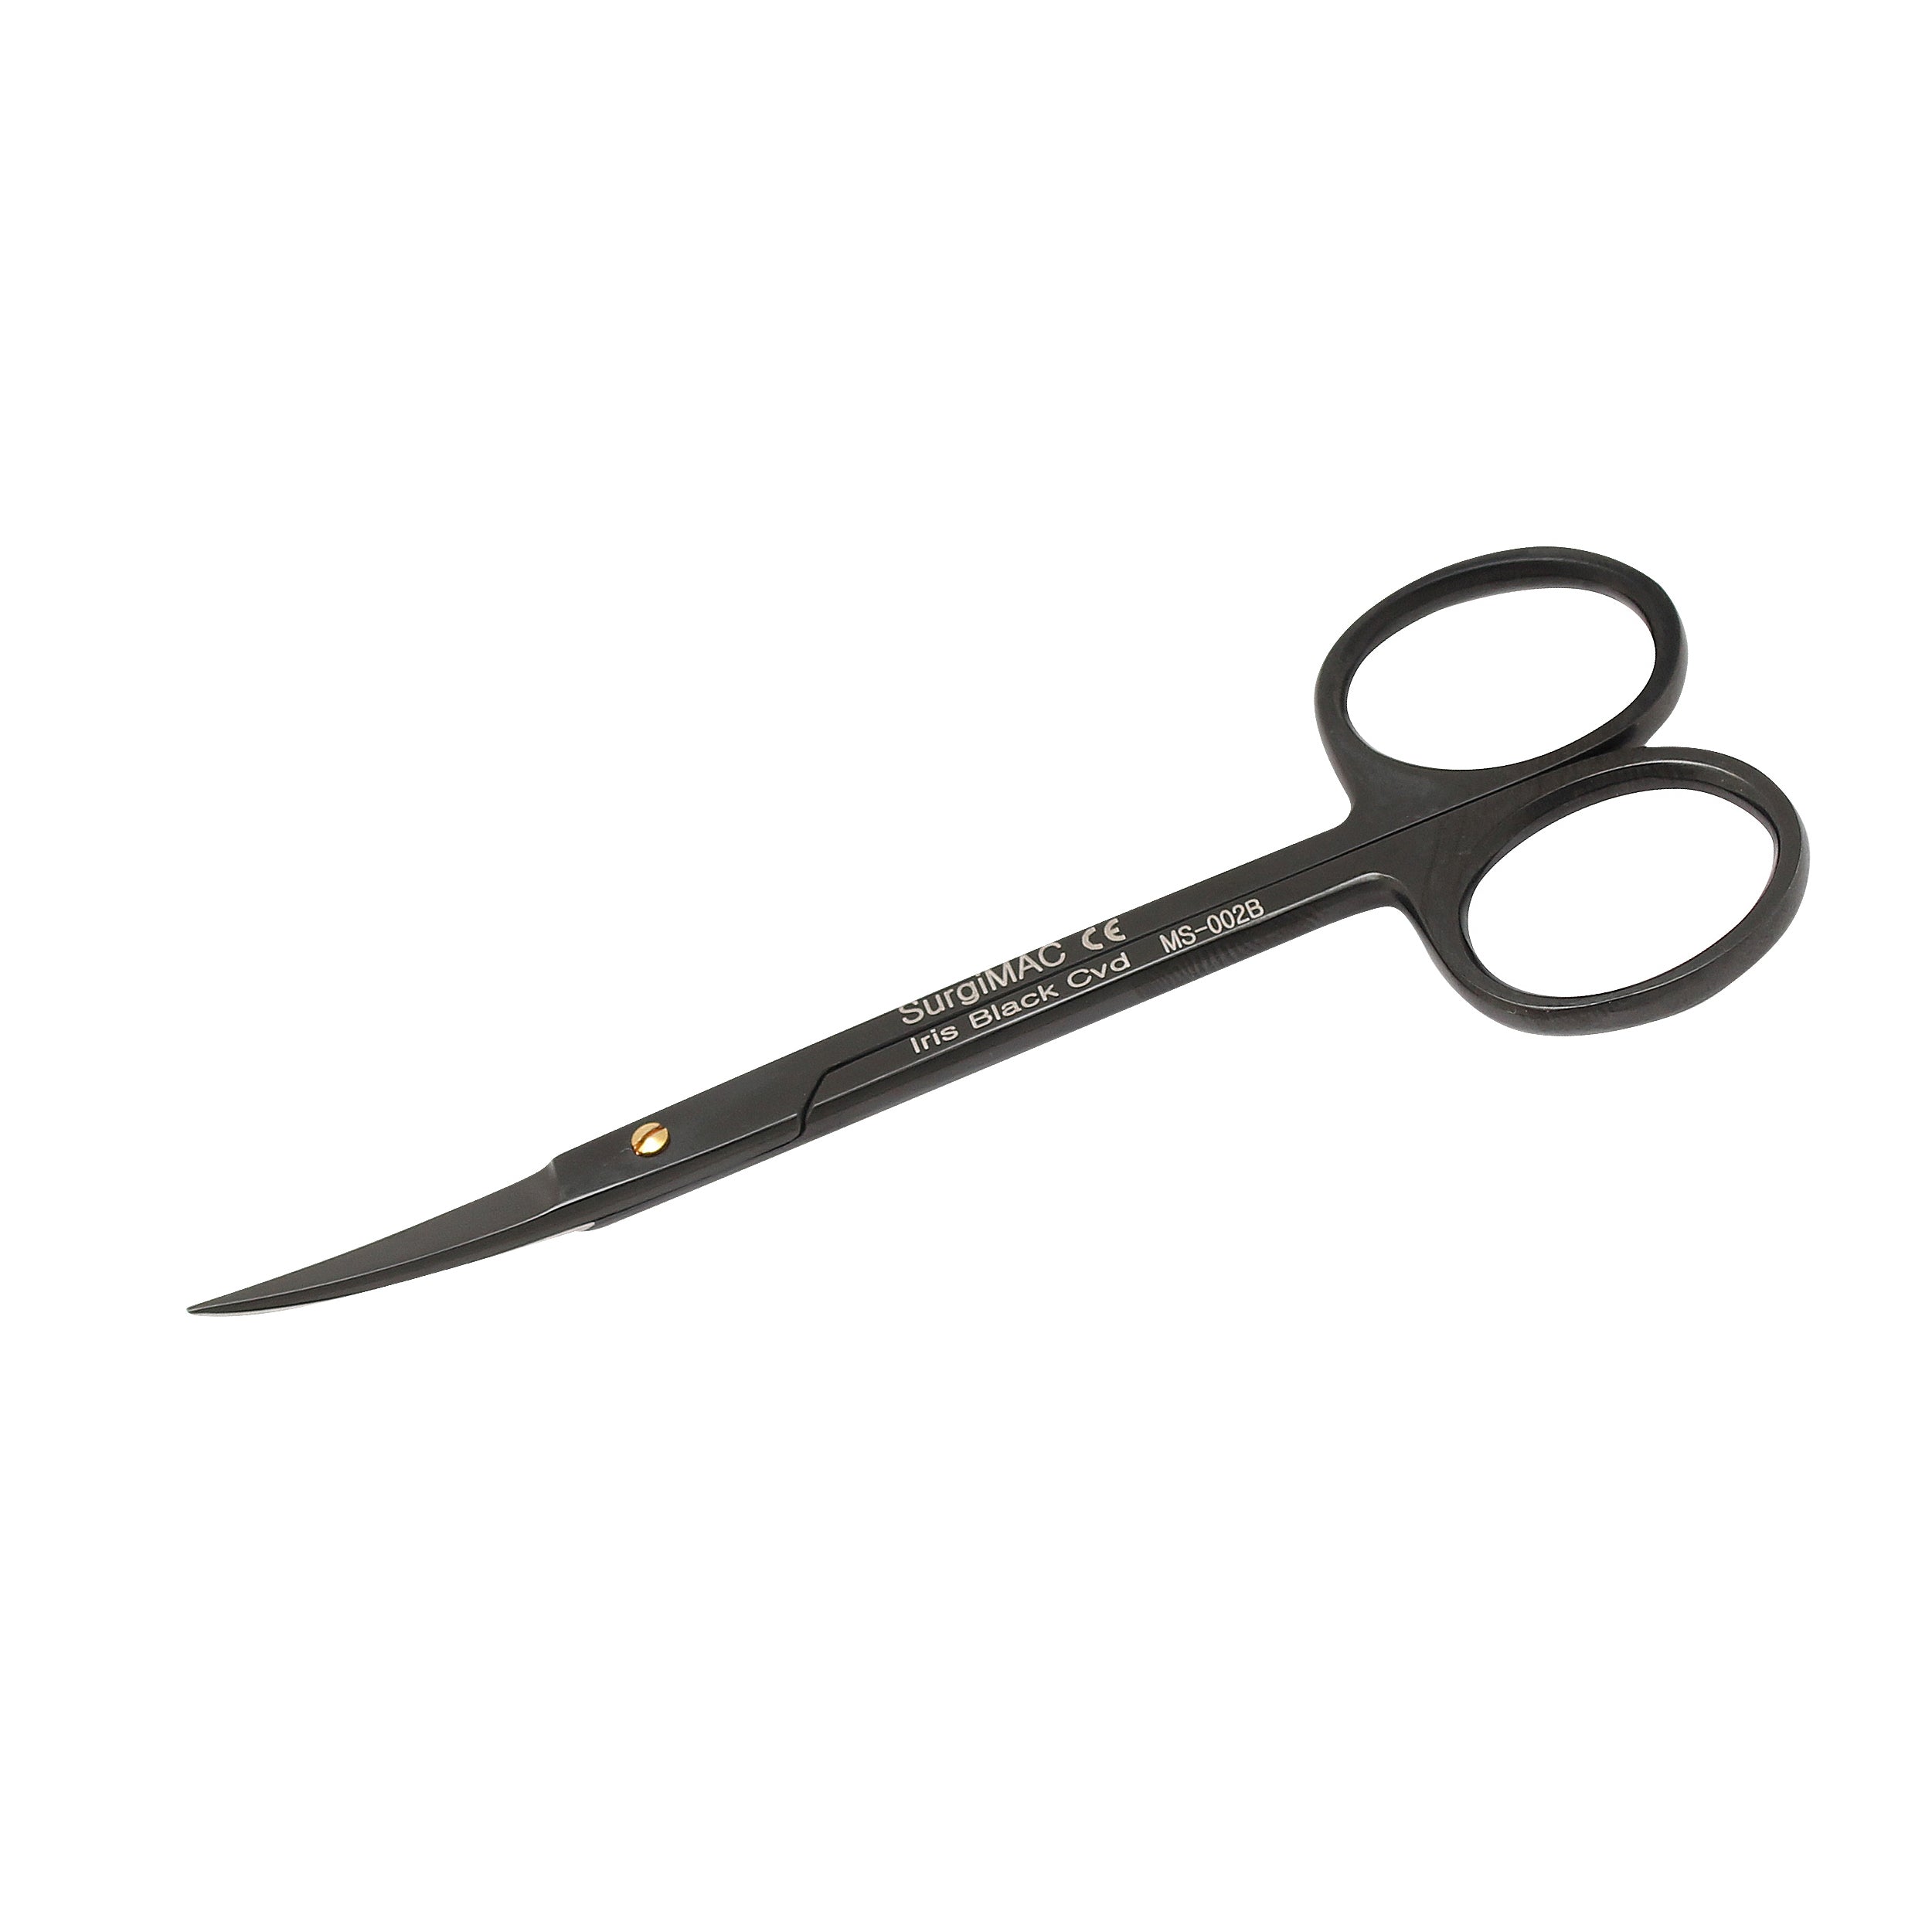 4.5 Sharp Curved Tip Craft Applique Embroidery Scissors, Stainless Steel  Thread Clippers, Black 